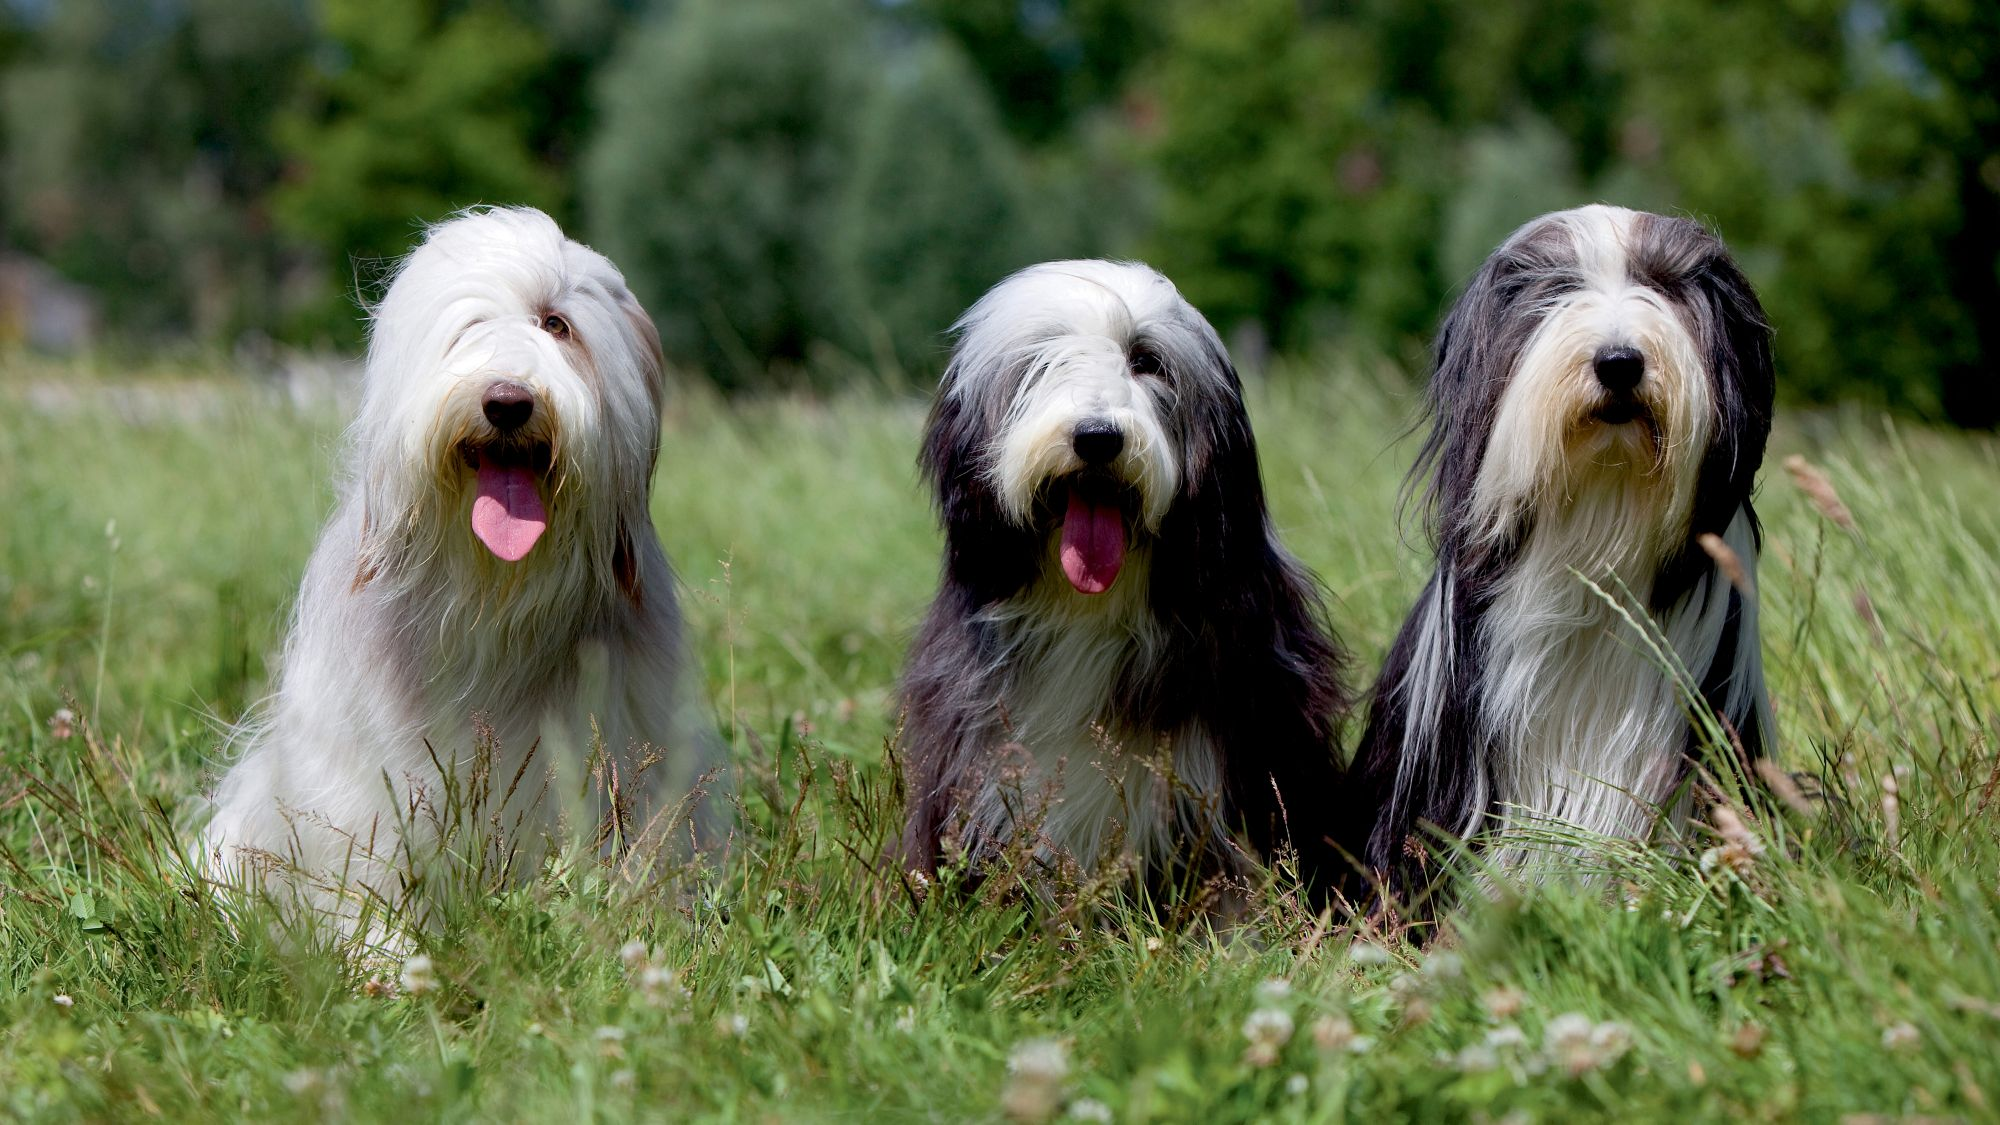 Three Bearded Collies sat next to each other in grass